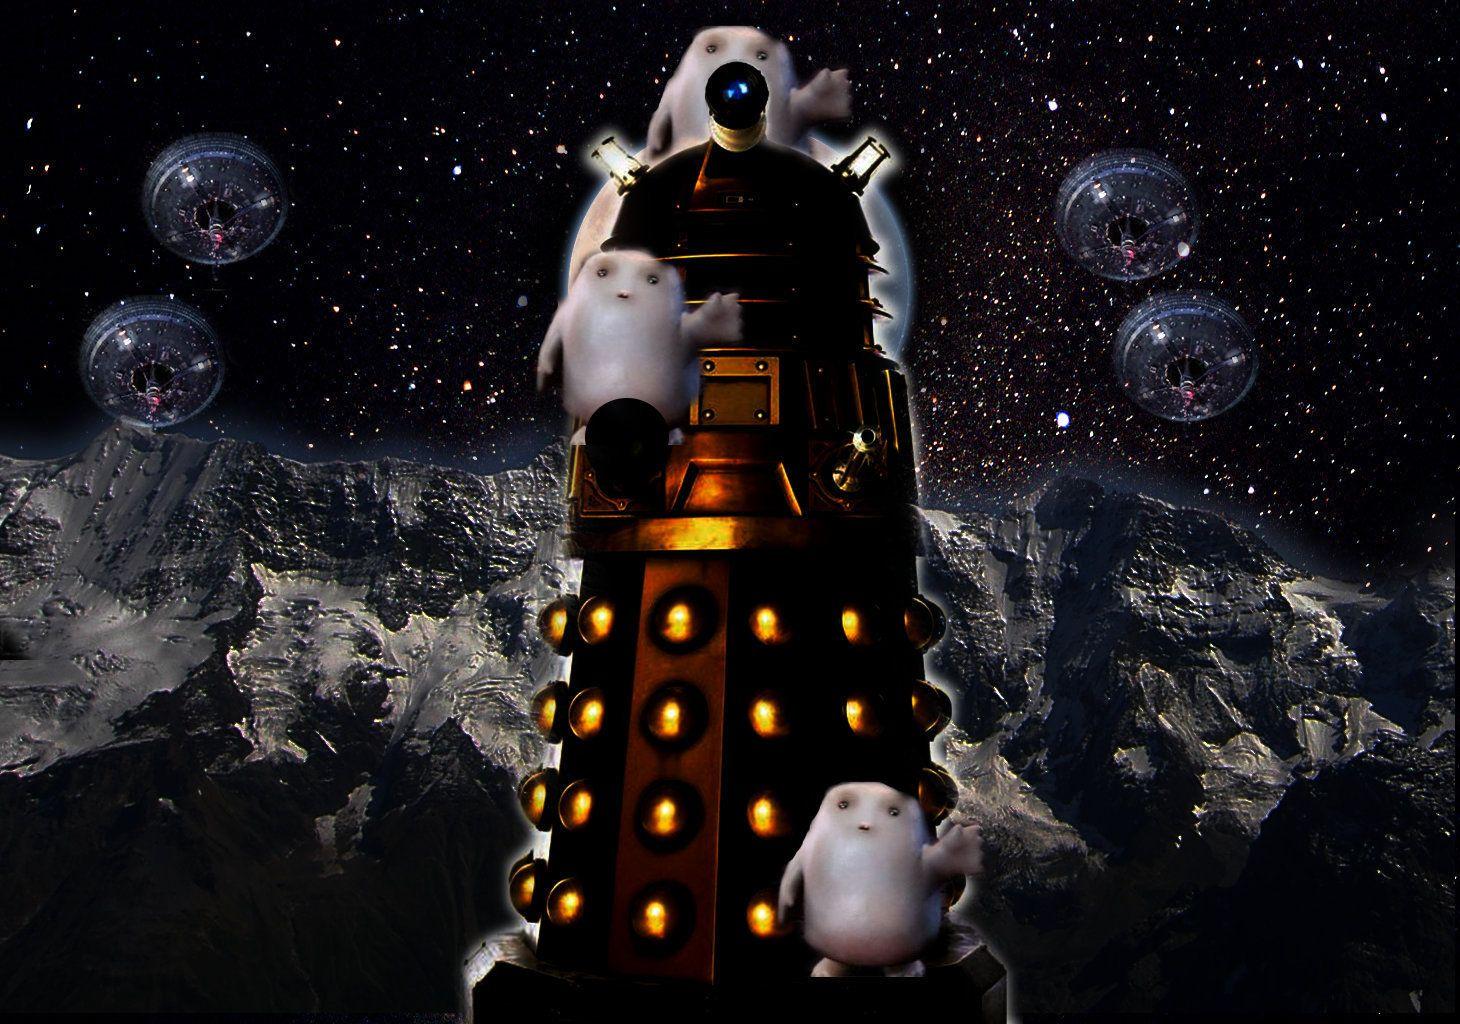 The Creatures of Doctor Who image adipose.daleks HD wallpaper